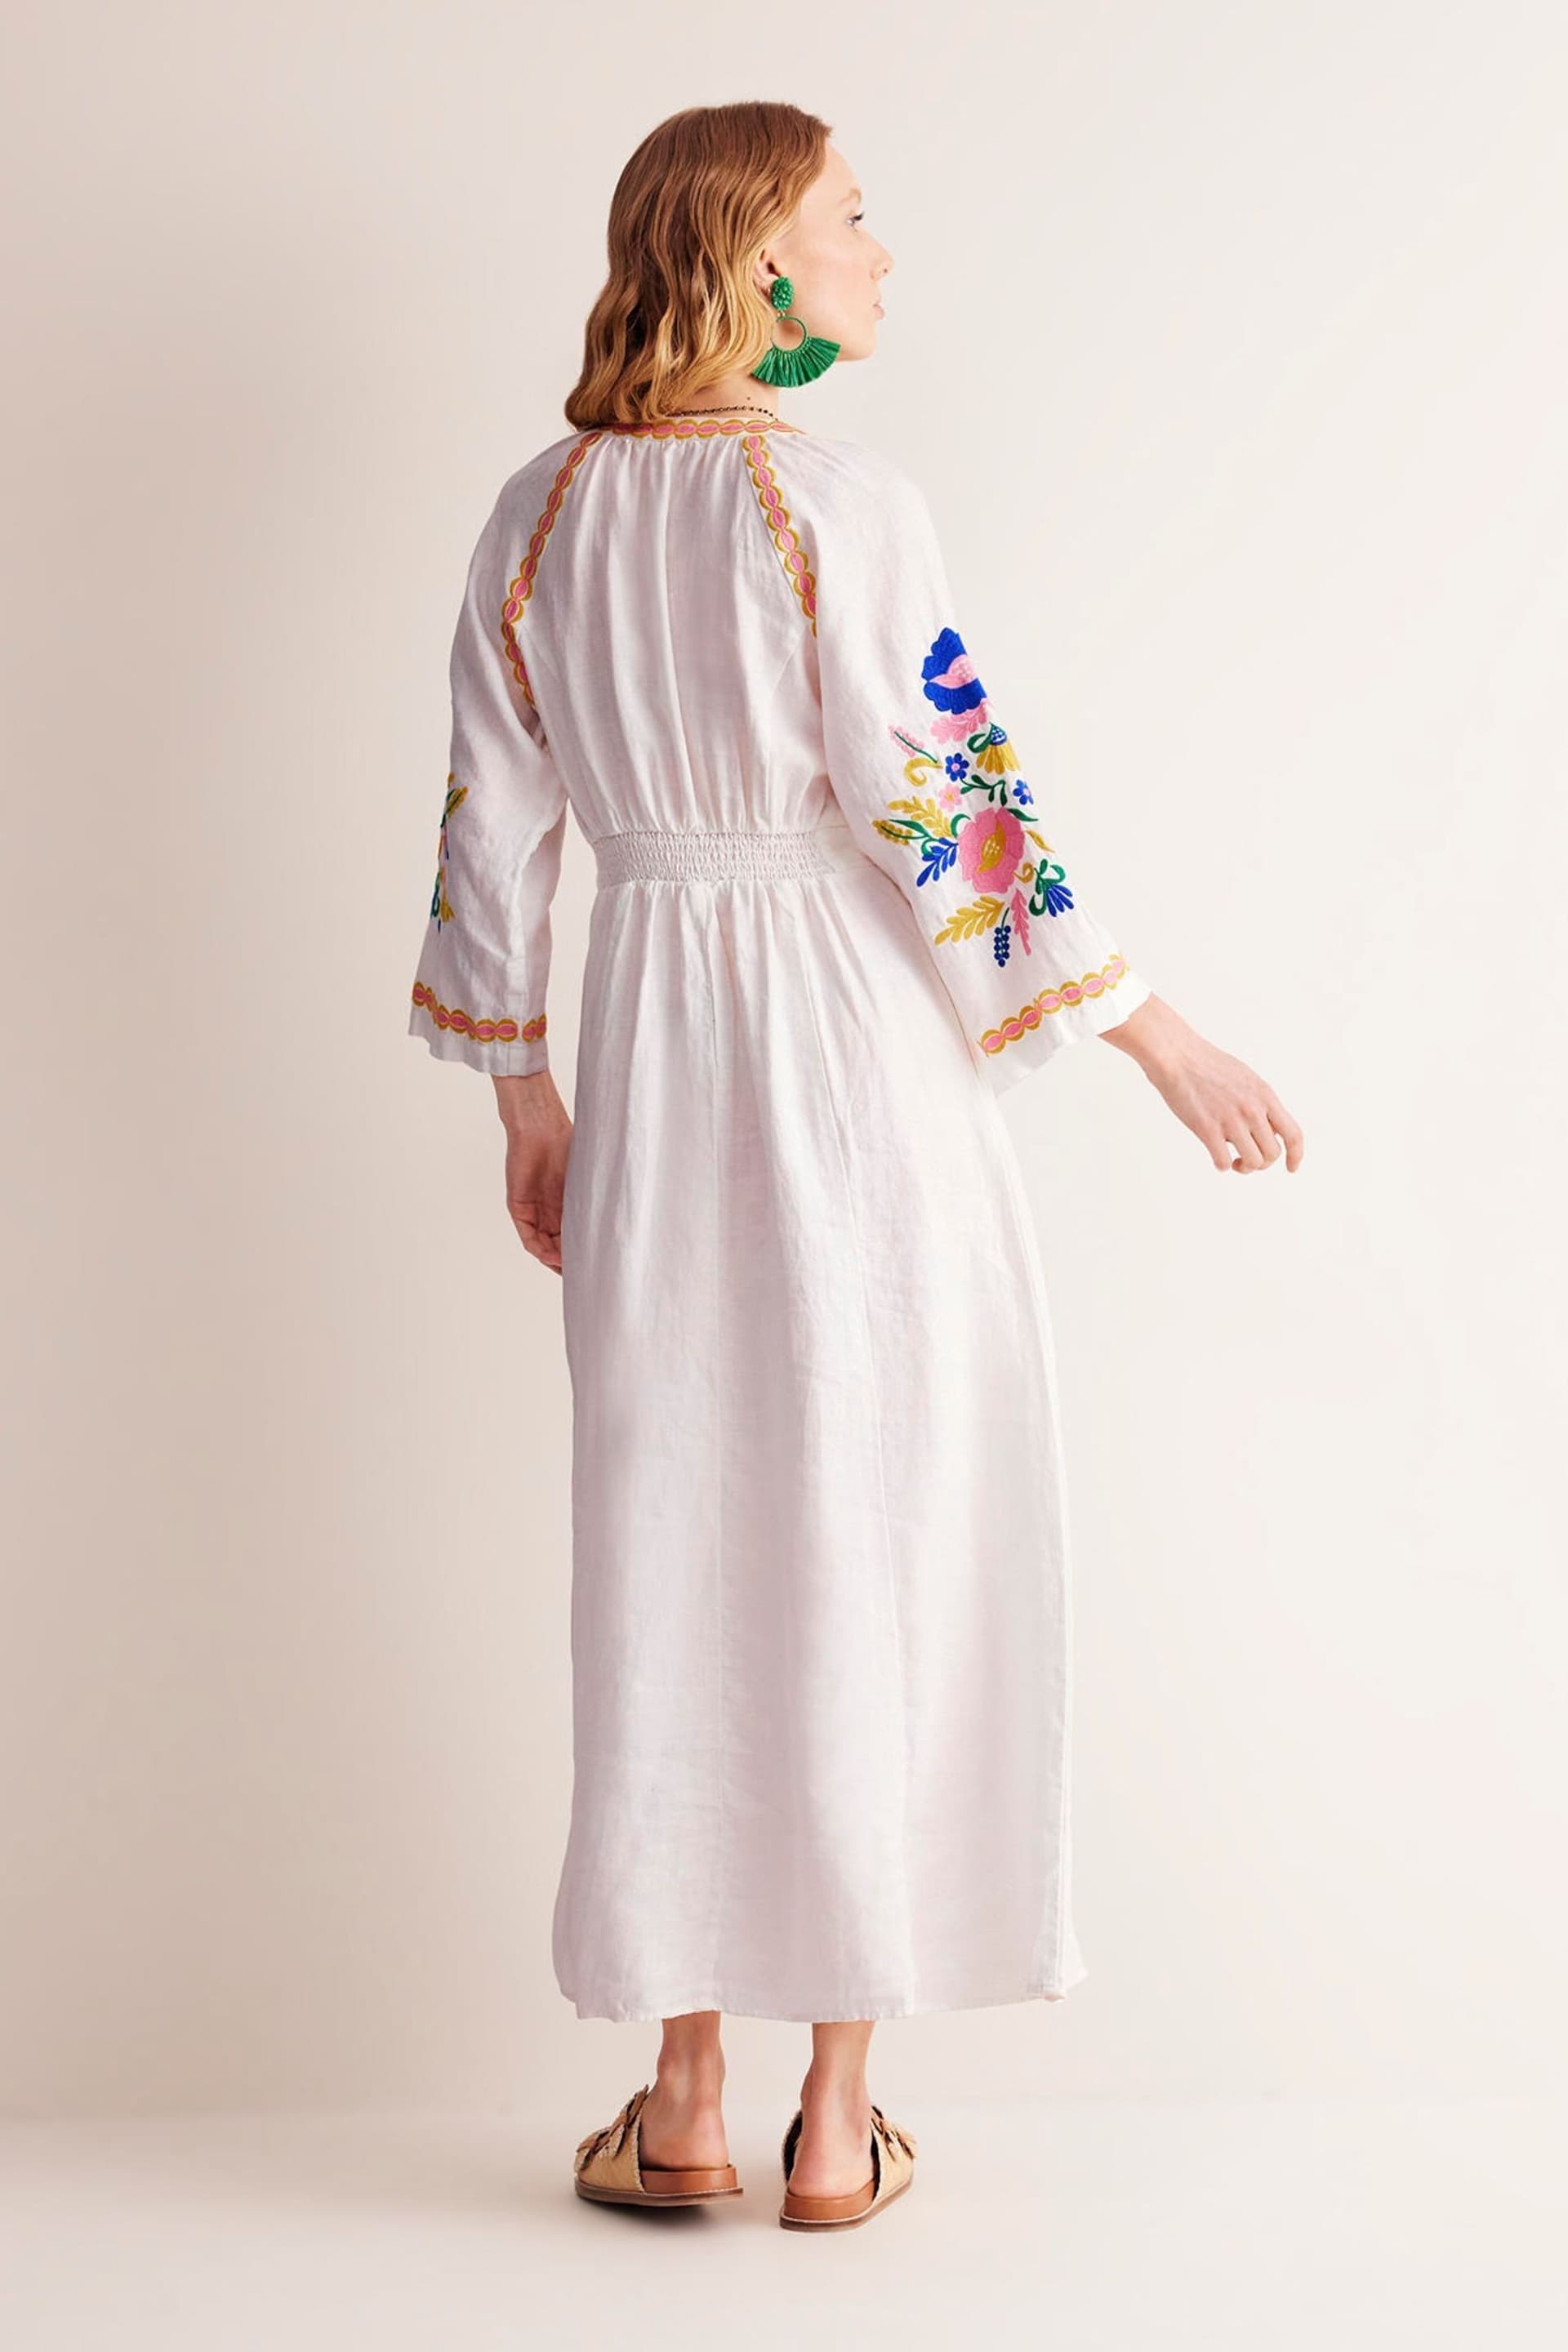 Boden White Una Linen Embroidered Dress - Image 3 of 7